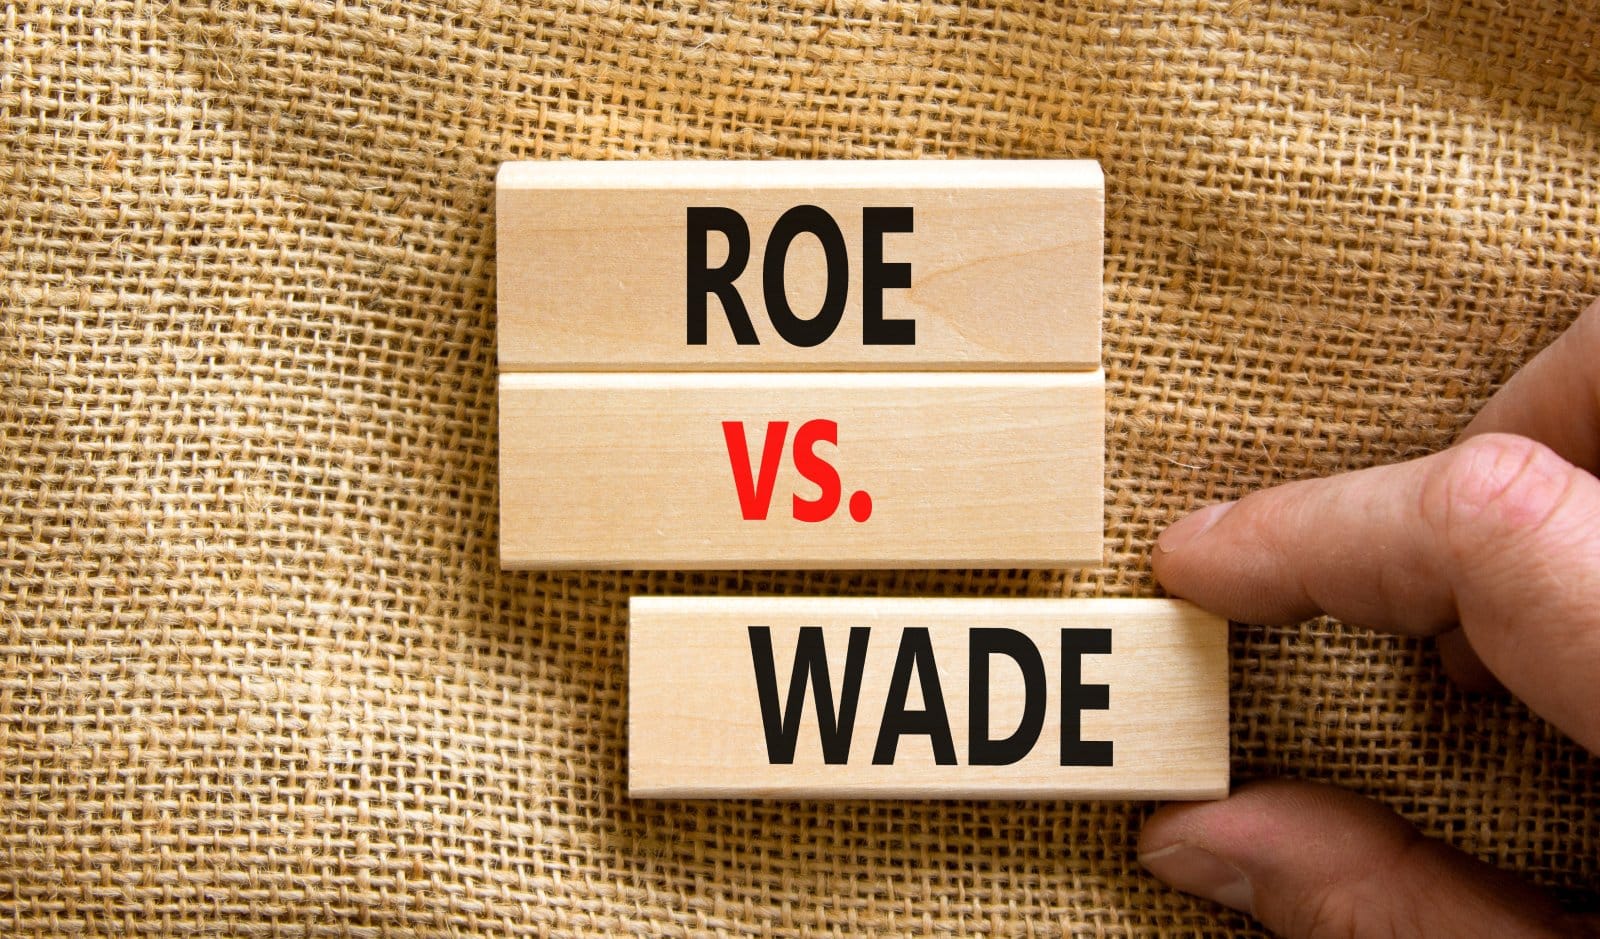 Image Credit: Shutterstock / Dmitry Demidovich <p><span>The landmark Roe v. Wade case legalized abortion nationwide, affirming a woman’s right to choose. This decision remains one of the most significant victories for reproductive rights and has been central to ongoing debates over women’s bodily autonomy.</span></p>